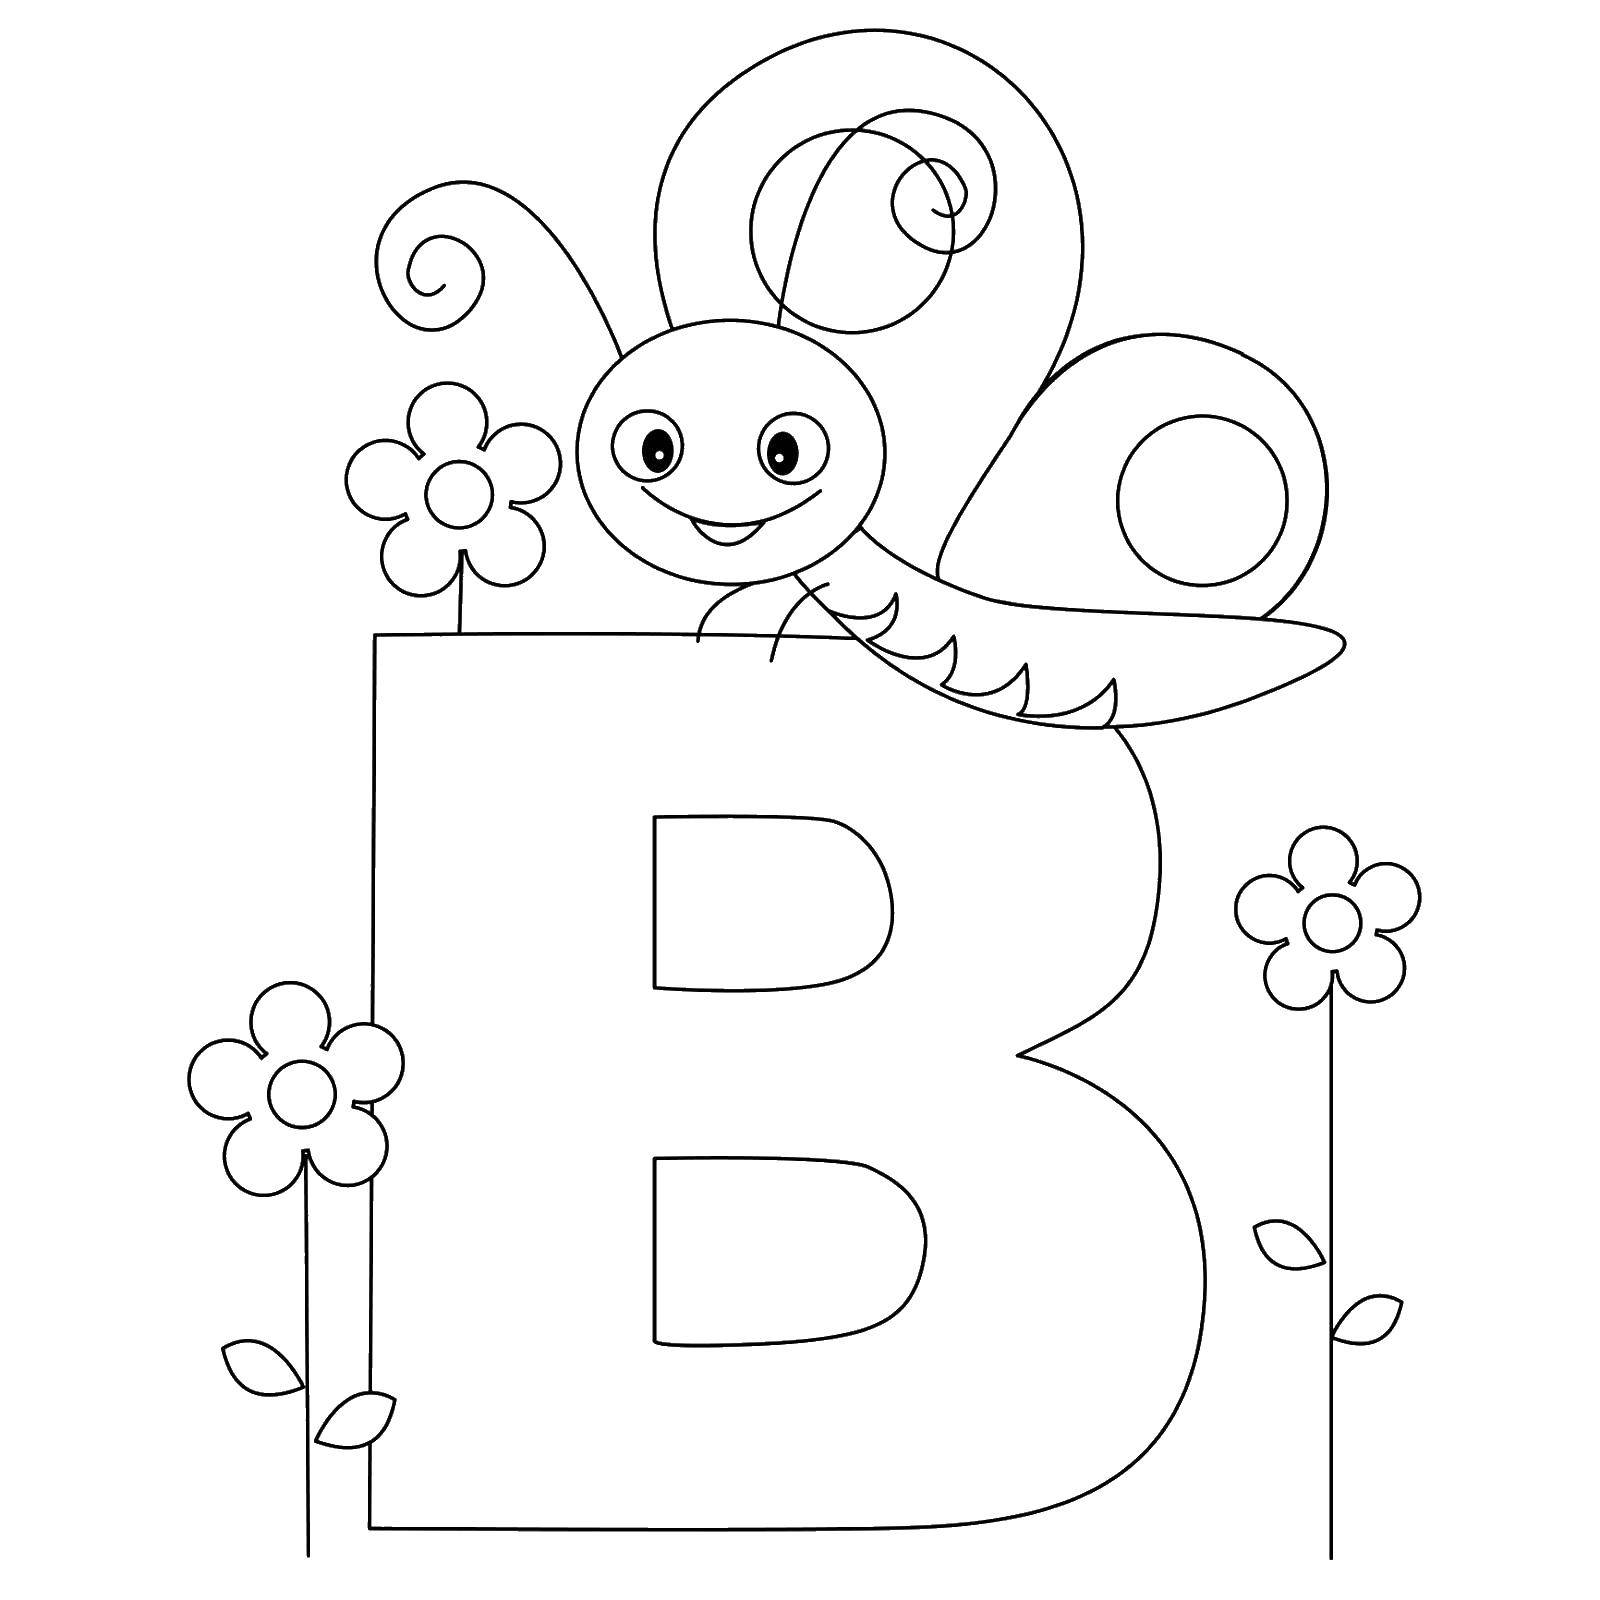 Coloring Bee on the letter b. Category English alphabet. Tags:  In, bee.